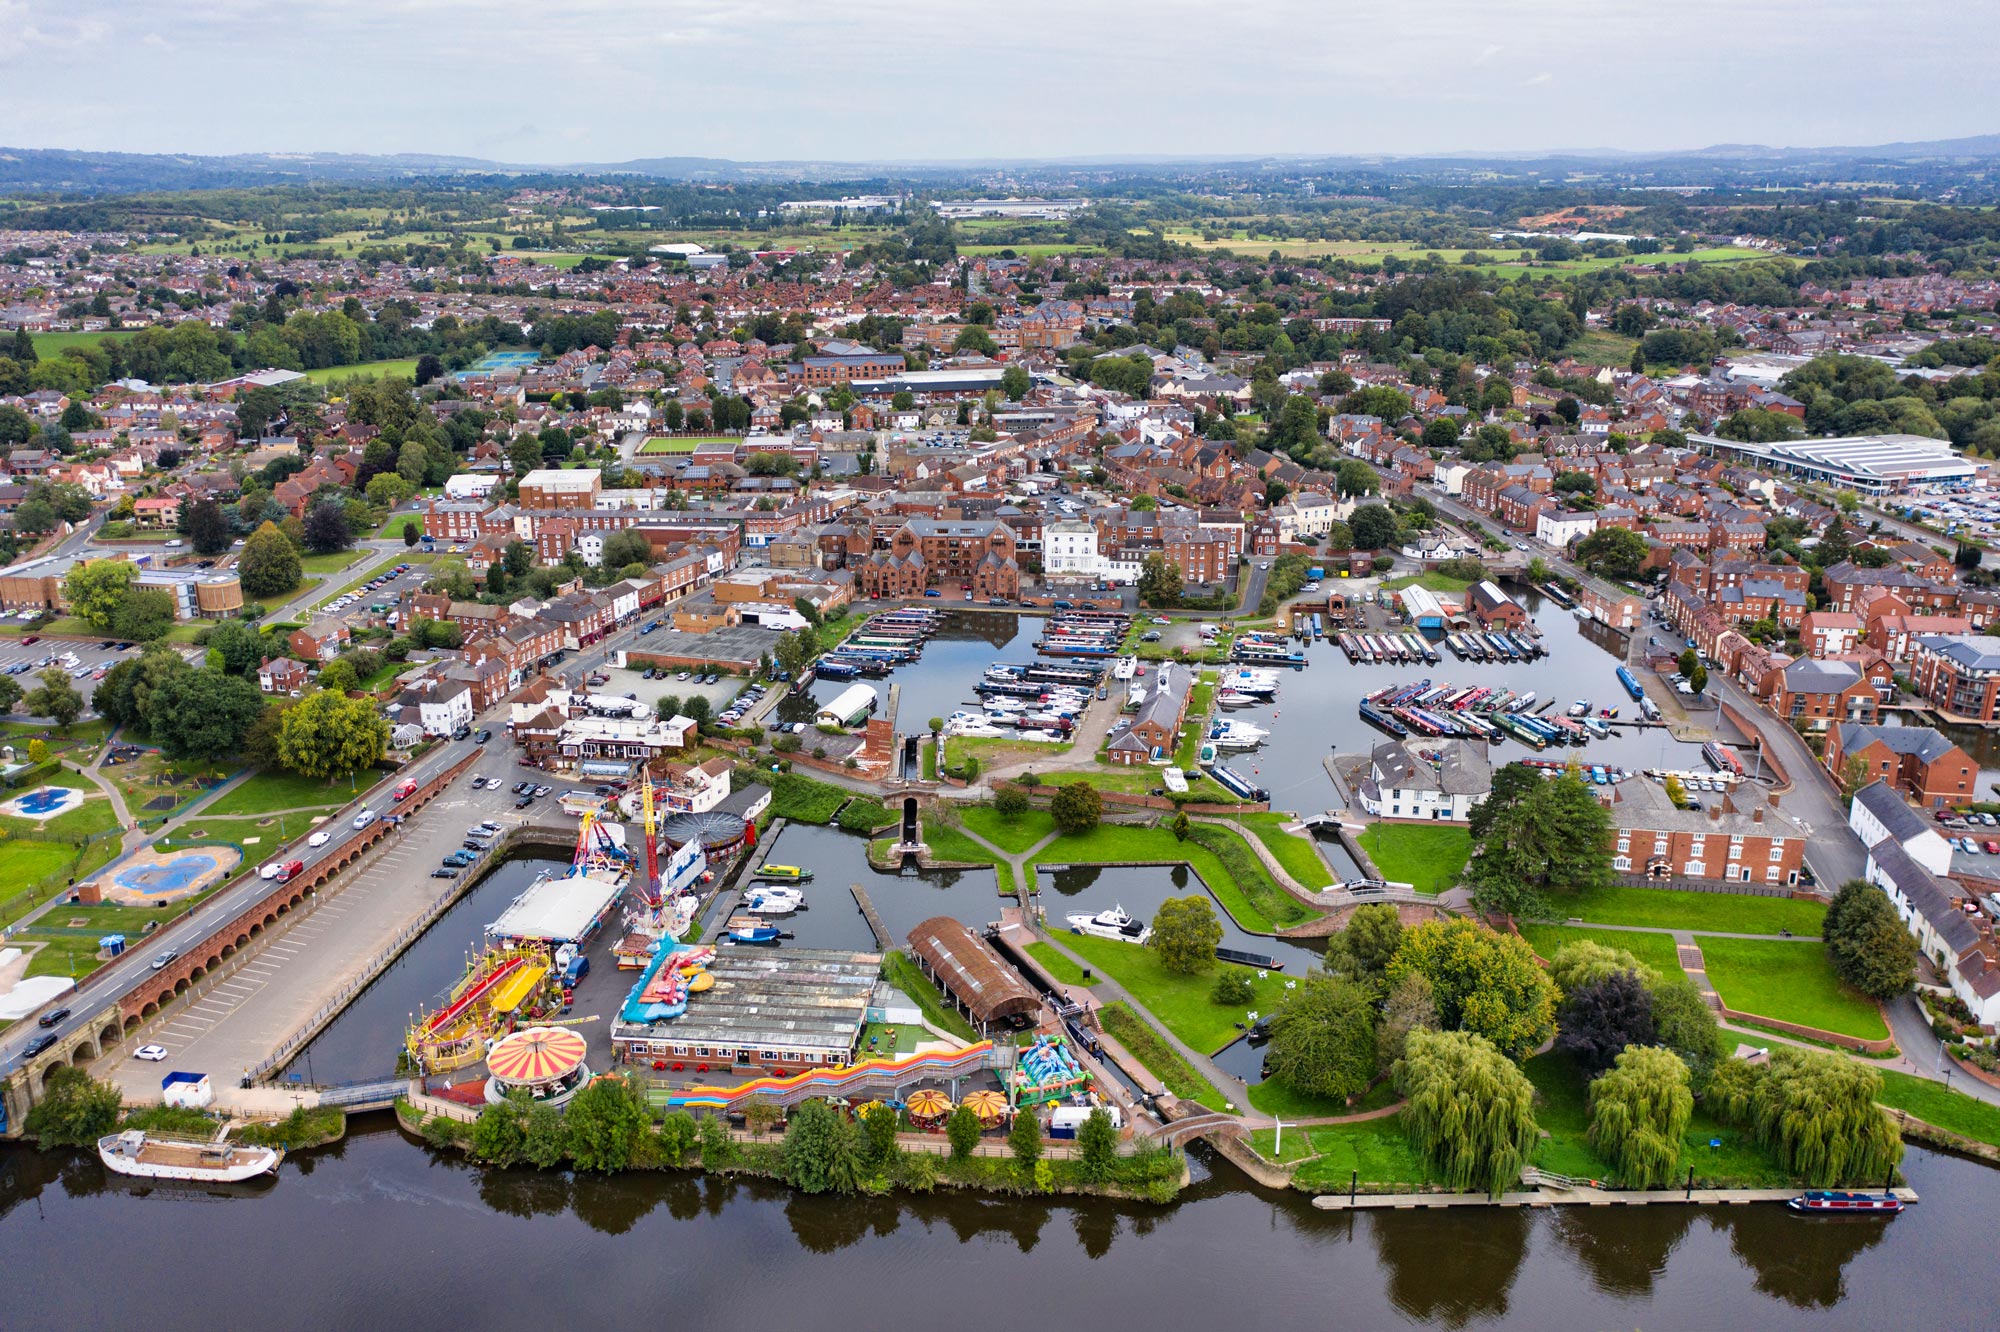 An image of Stourport Town, Stourport-on-Severn, from the air. Including The high street, river sever, tontine, Stourport Canal Basins, Treasure Island Amusements and more. Image credit Michael Whitefoot